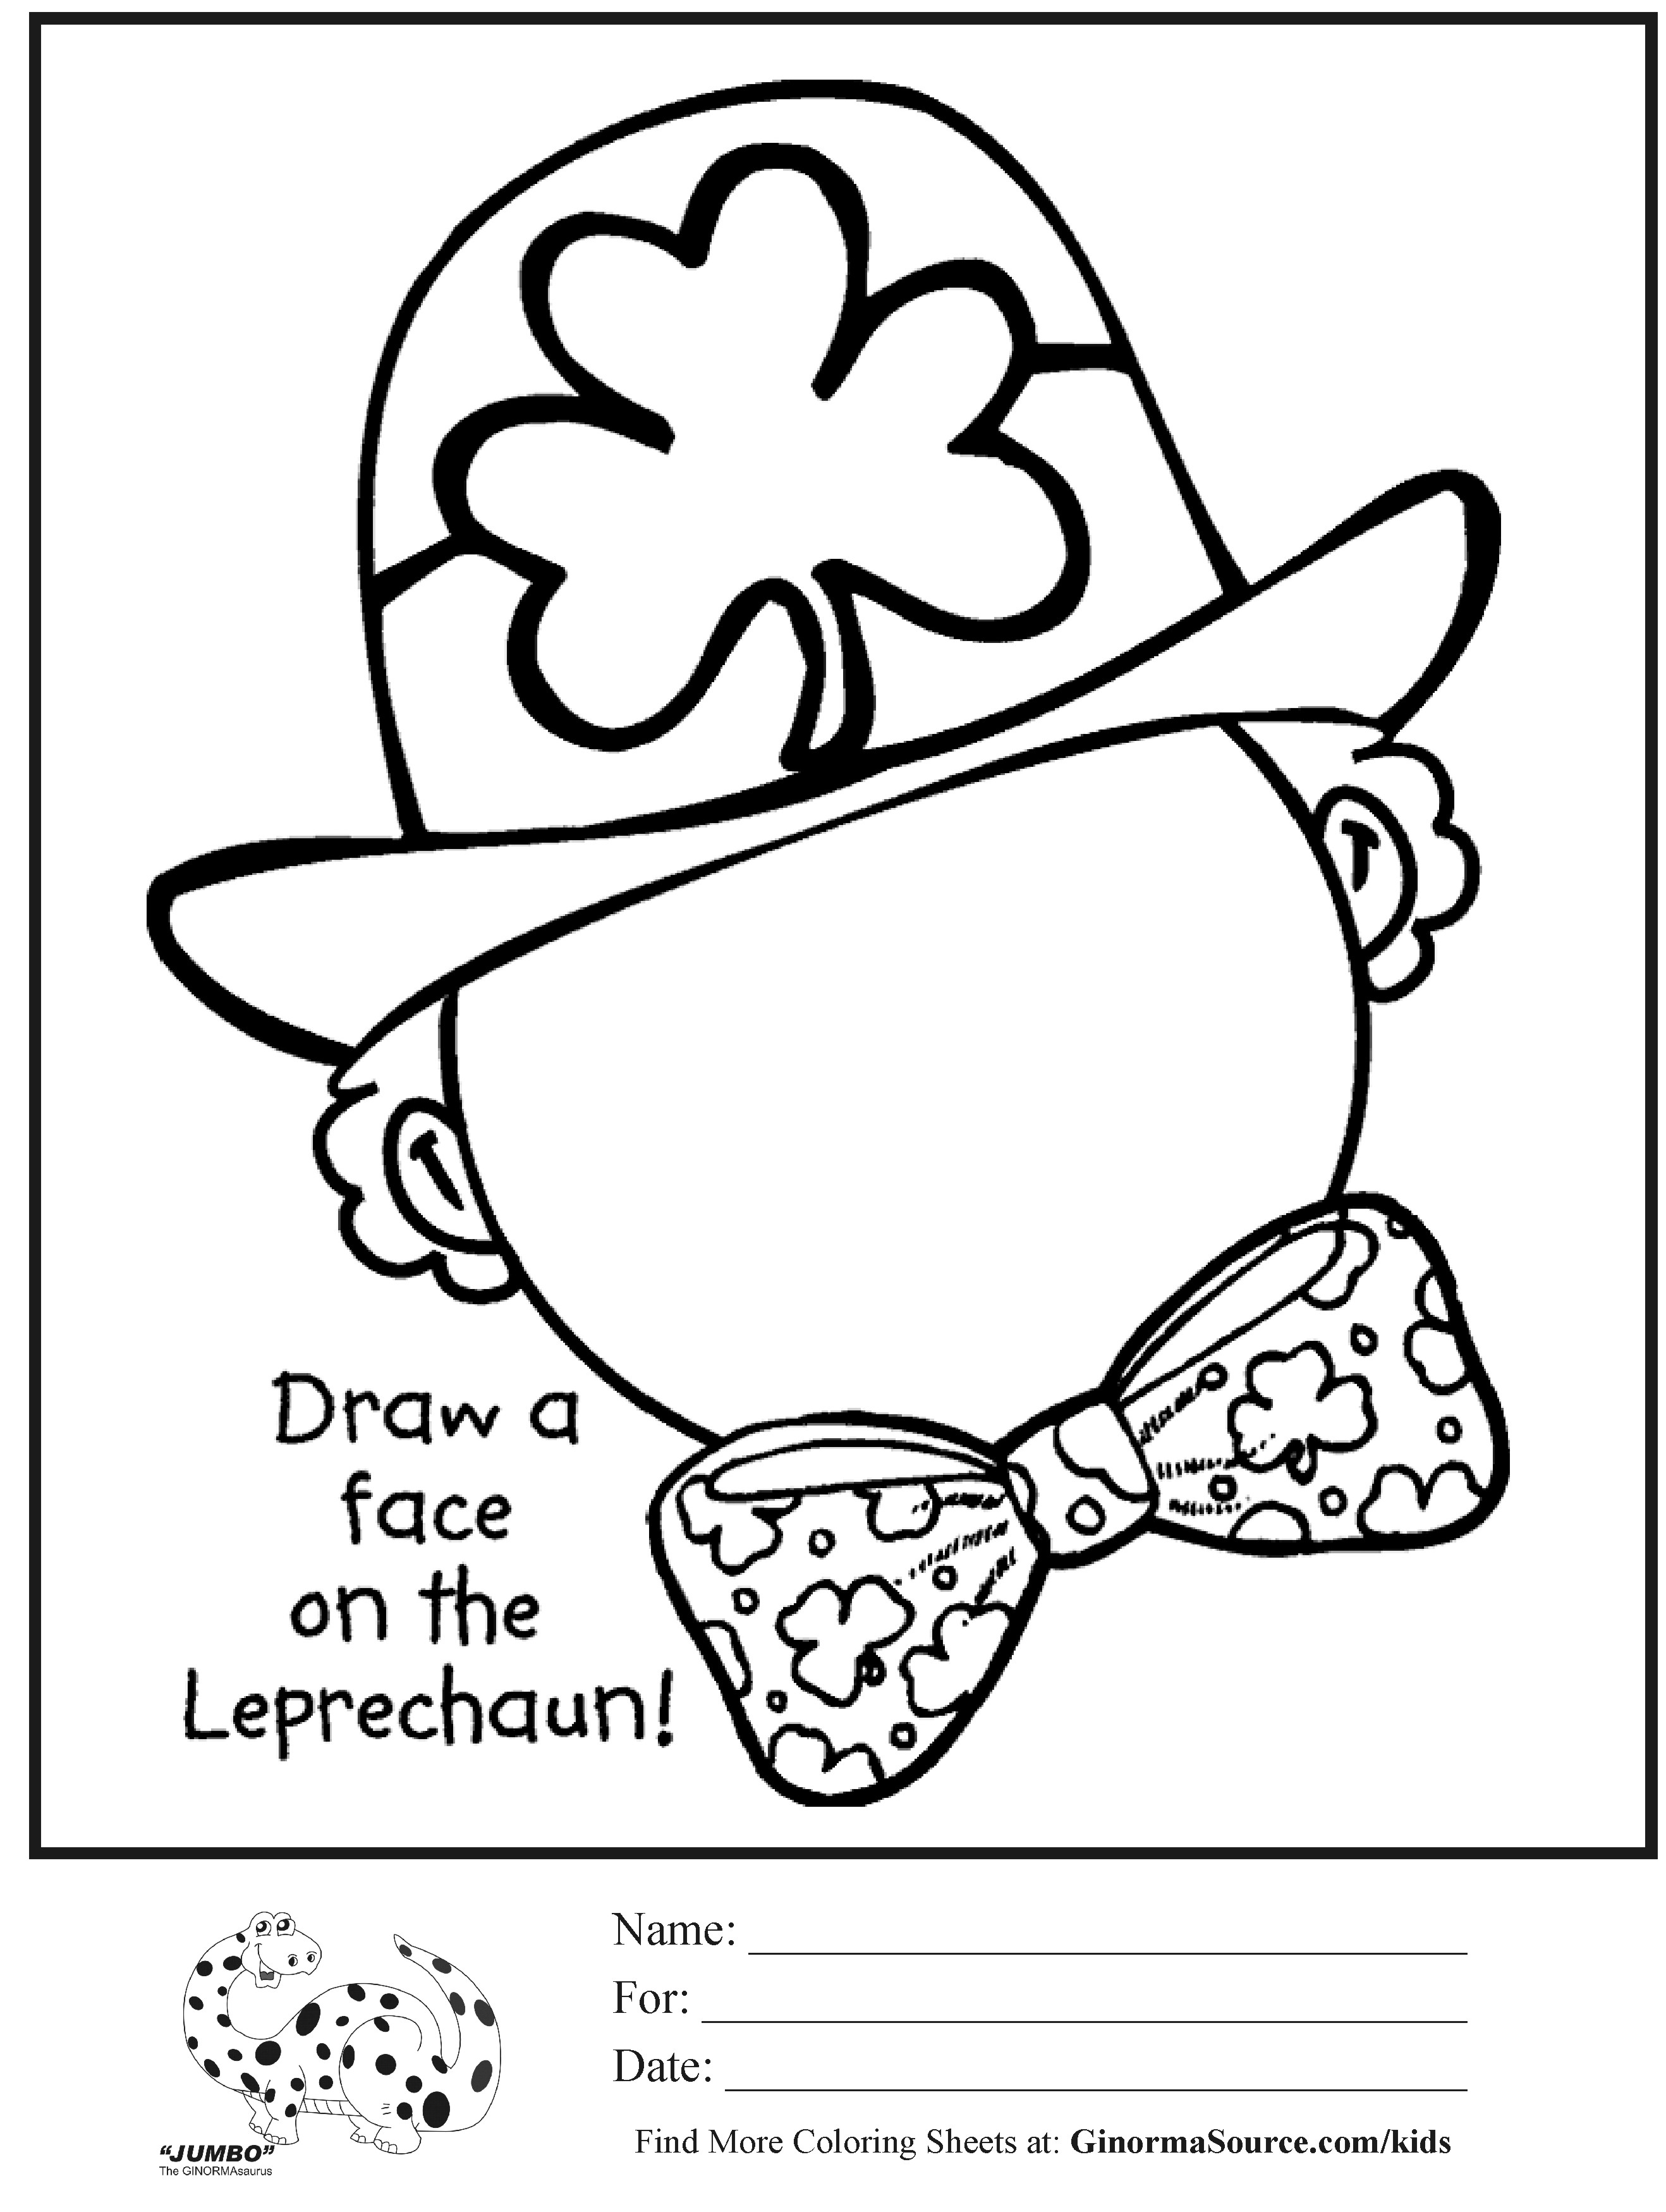 san-patrick-day-coloring-pages-st-patrick-s-day-coloring-pages-mushroom-st-patrick